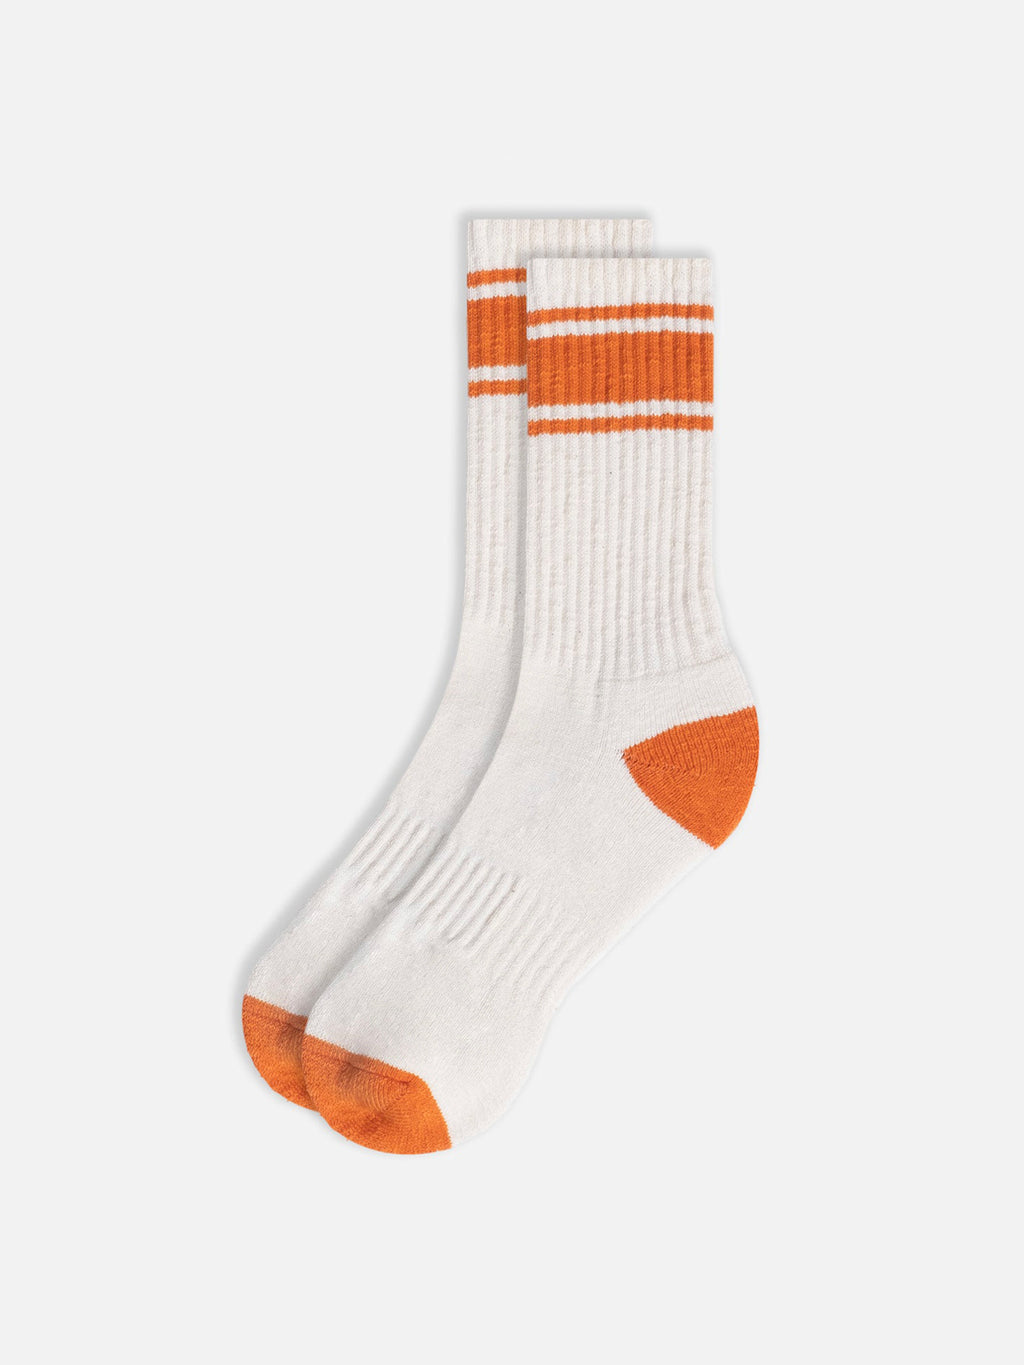 Everyday Cotton Sock Olive - Made in Canada - Province of Canada